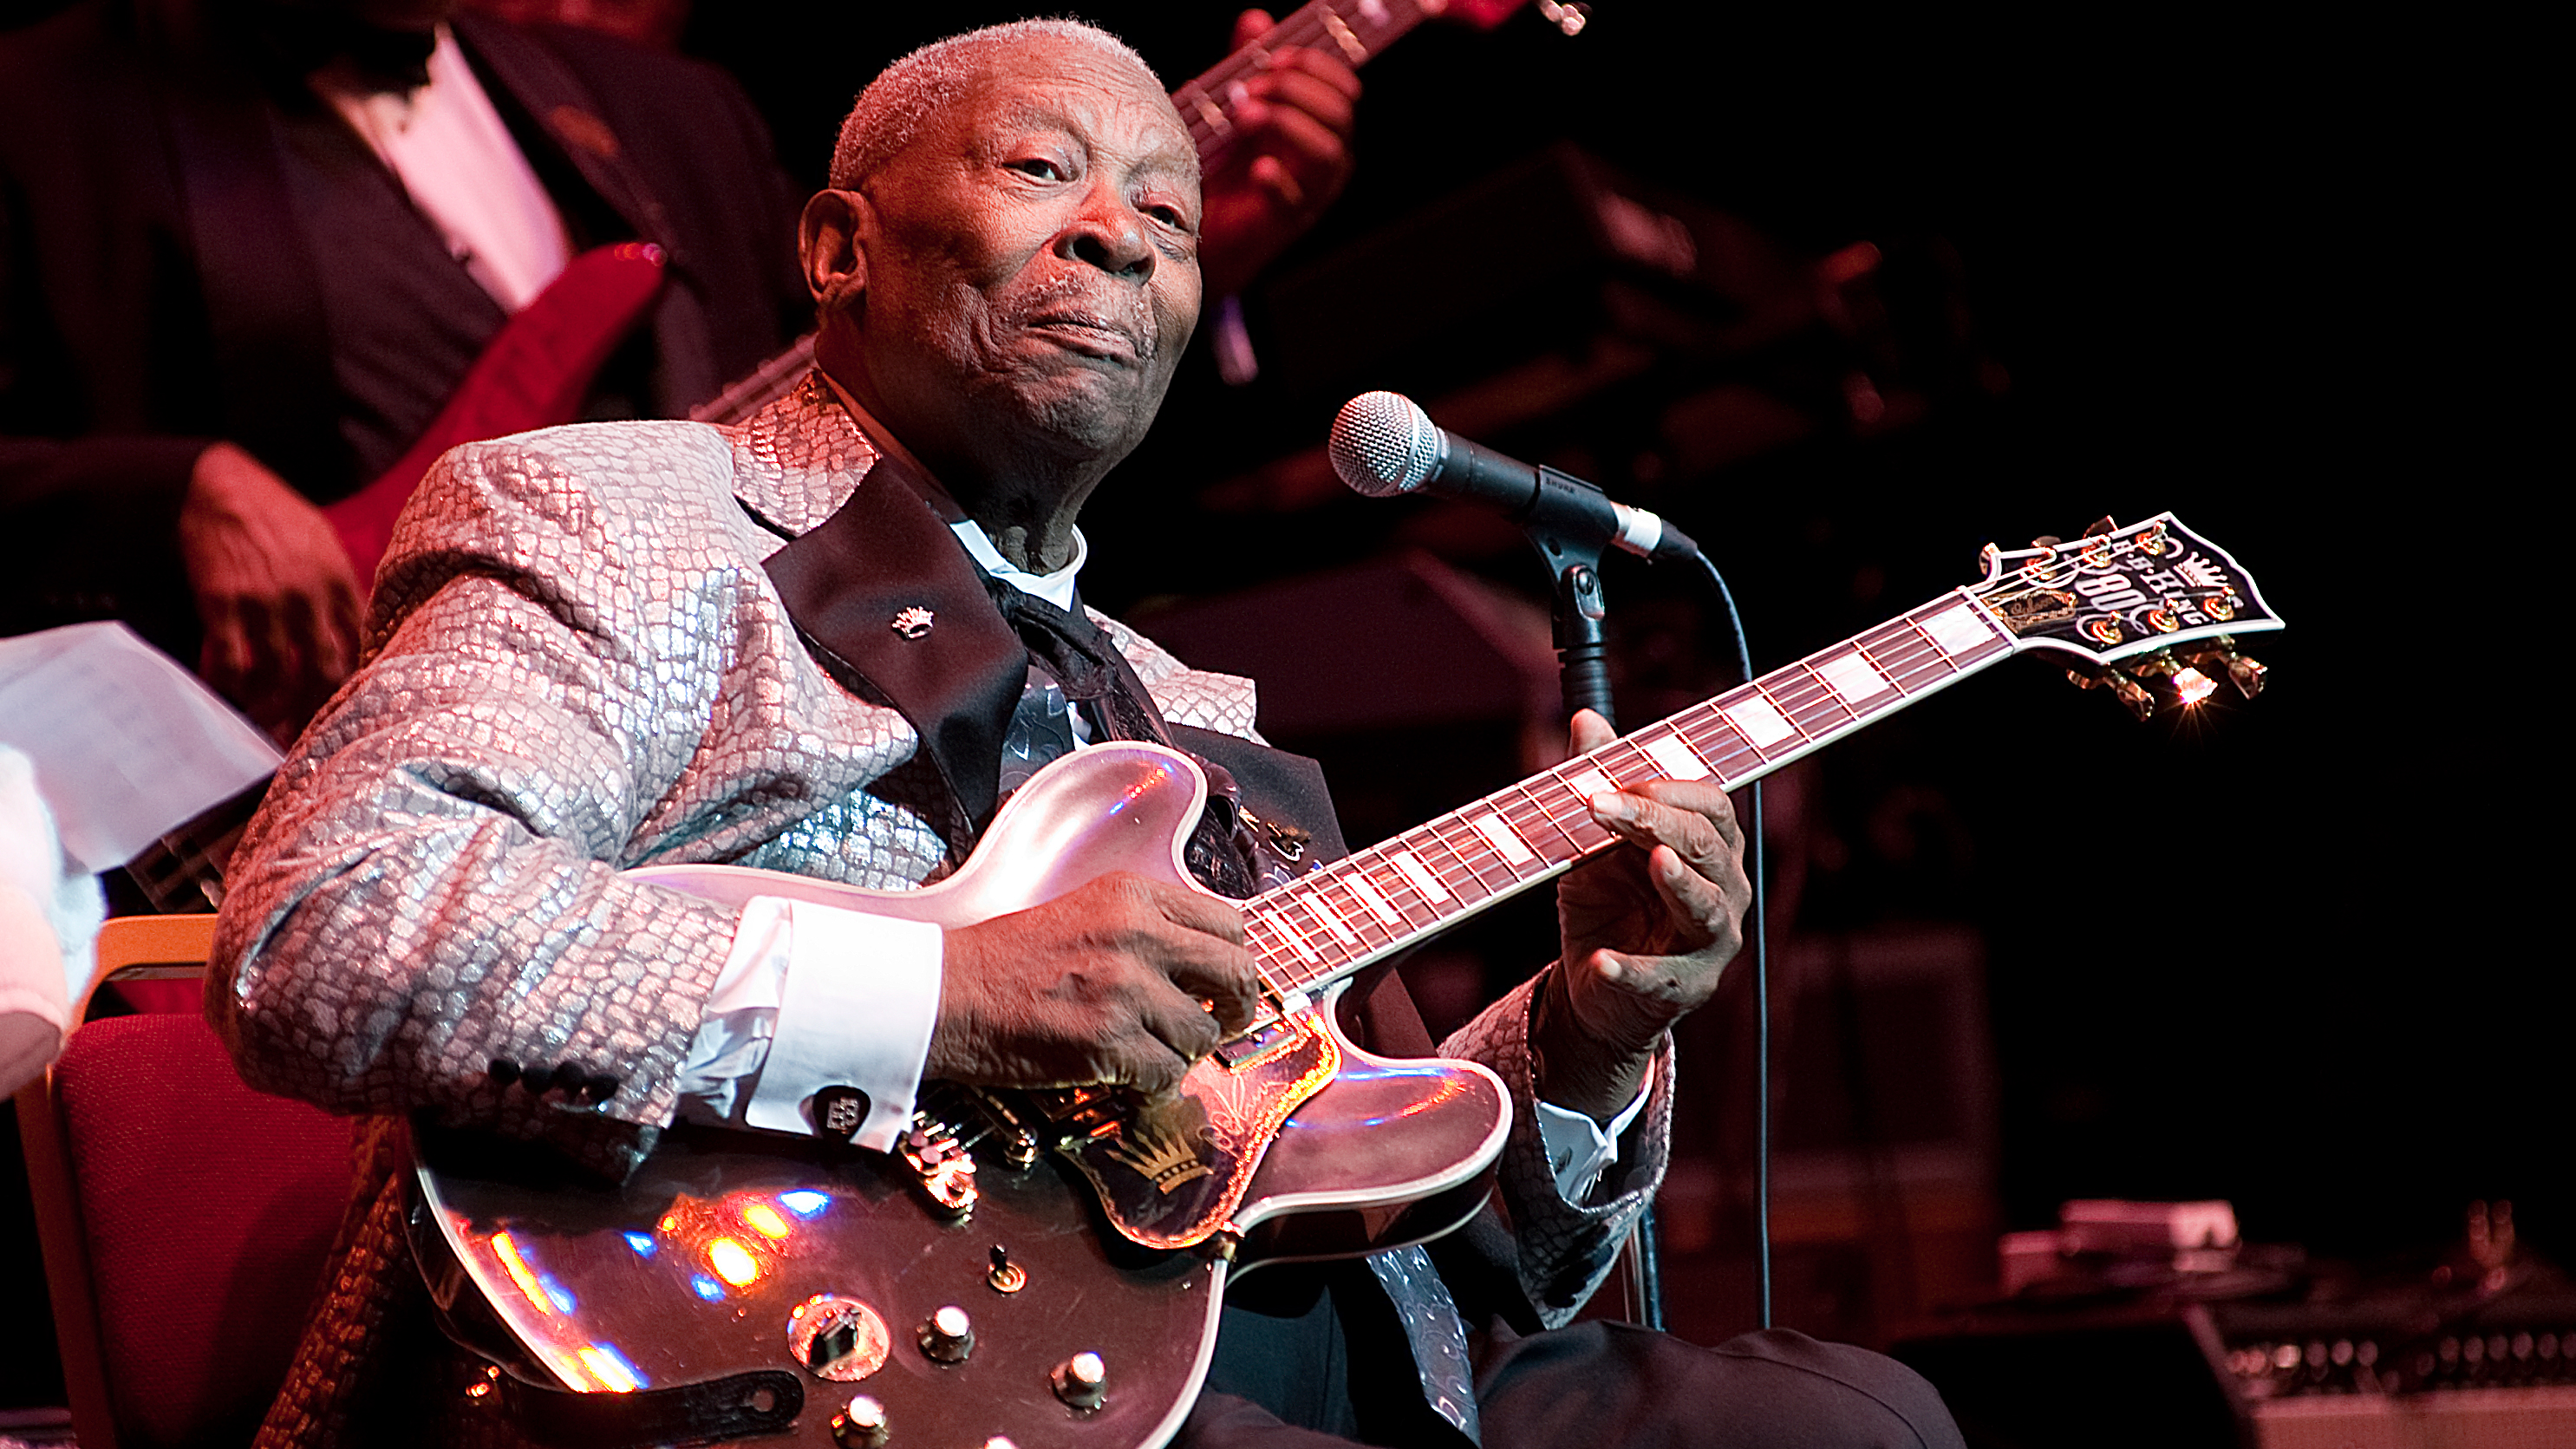  B.B. King performs on stage at the Royal Albert Hall. Photo: Kevin Nixon